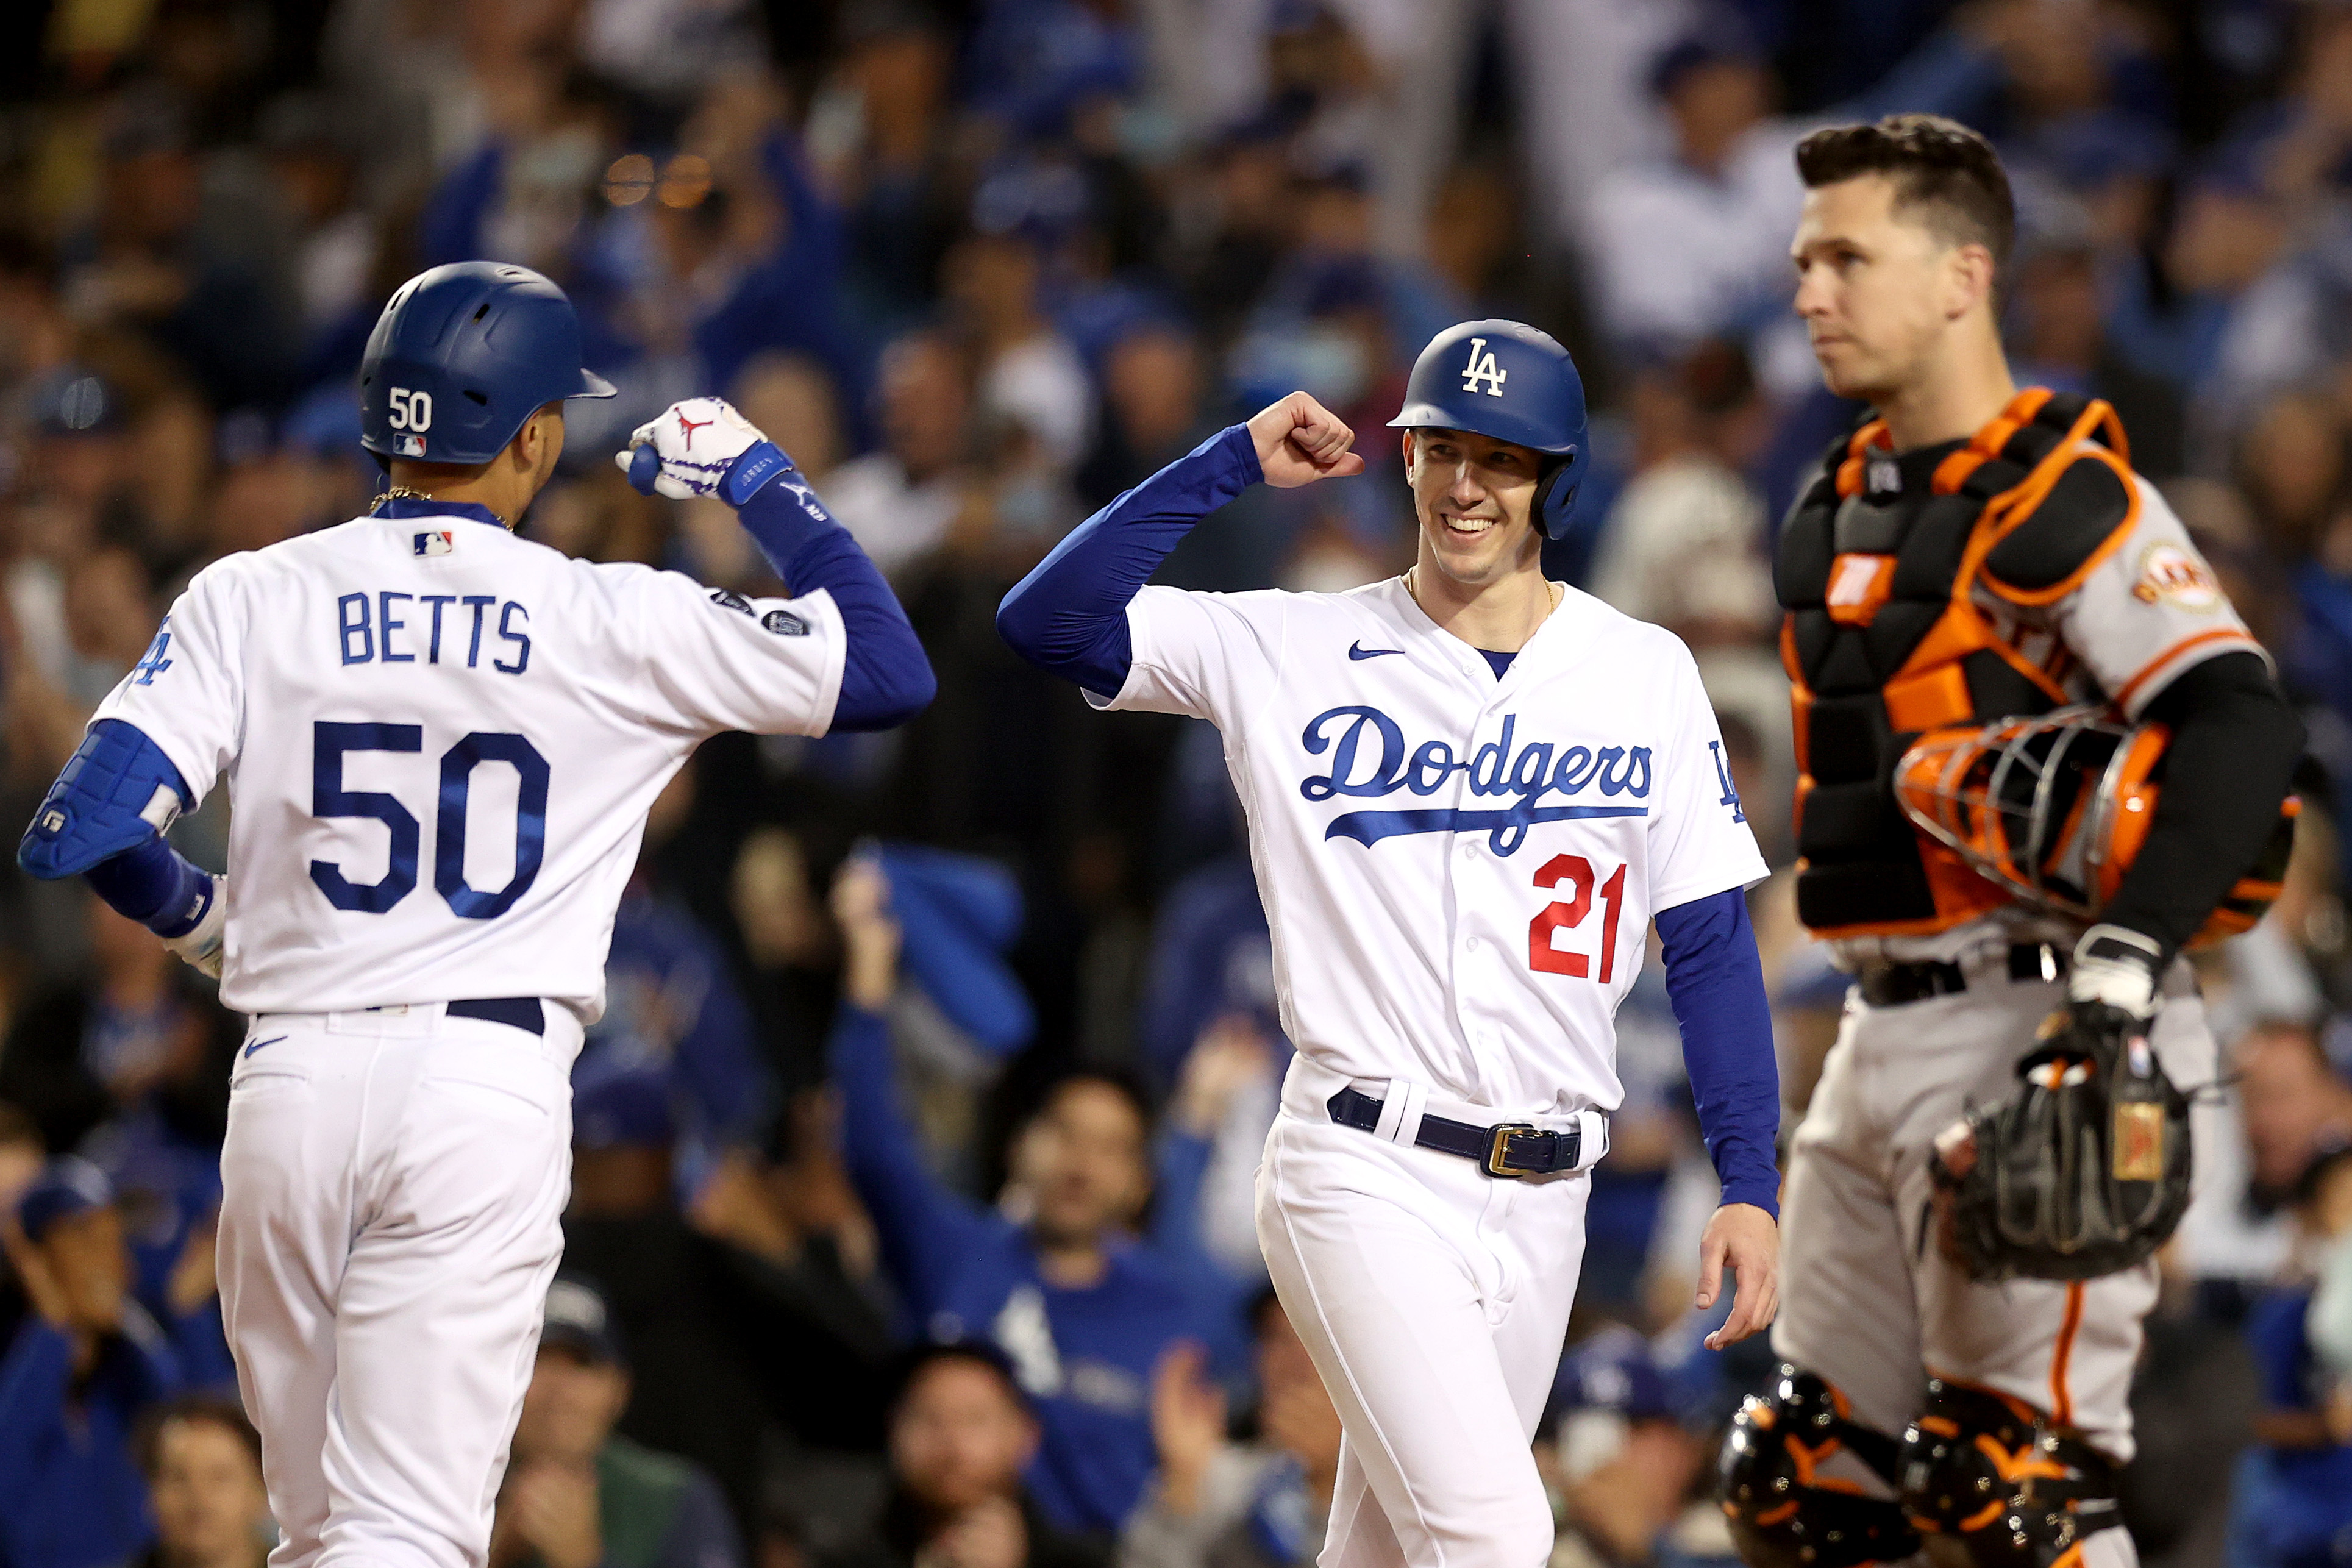 Dodgers Stave Off Elimination in Game 4, Beat Giants 7-2 to Force Game 5 in San Francisco